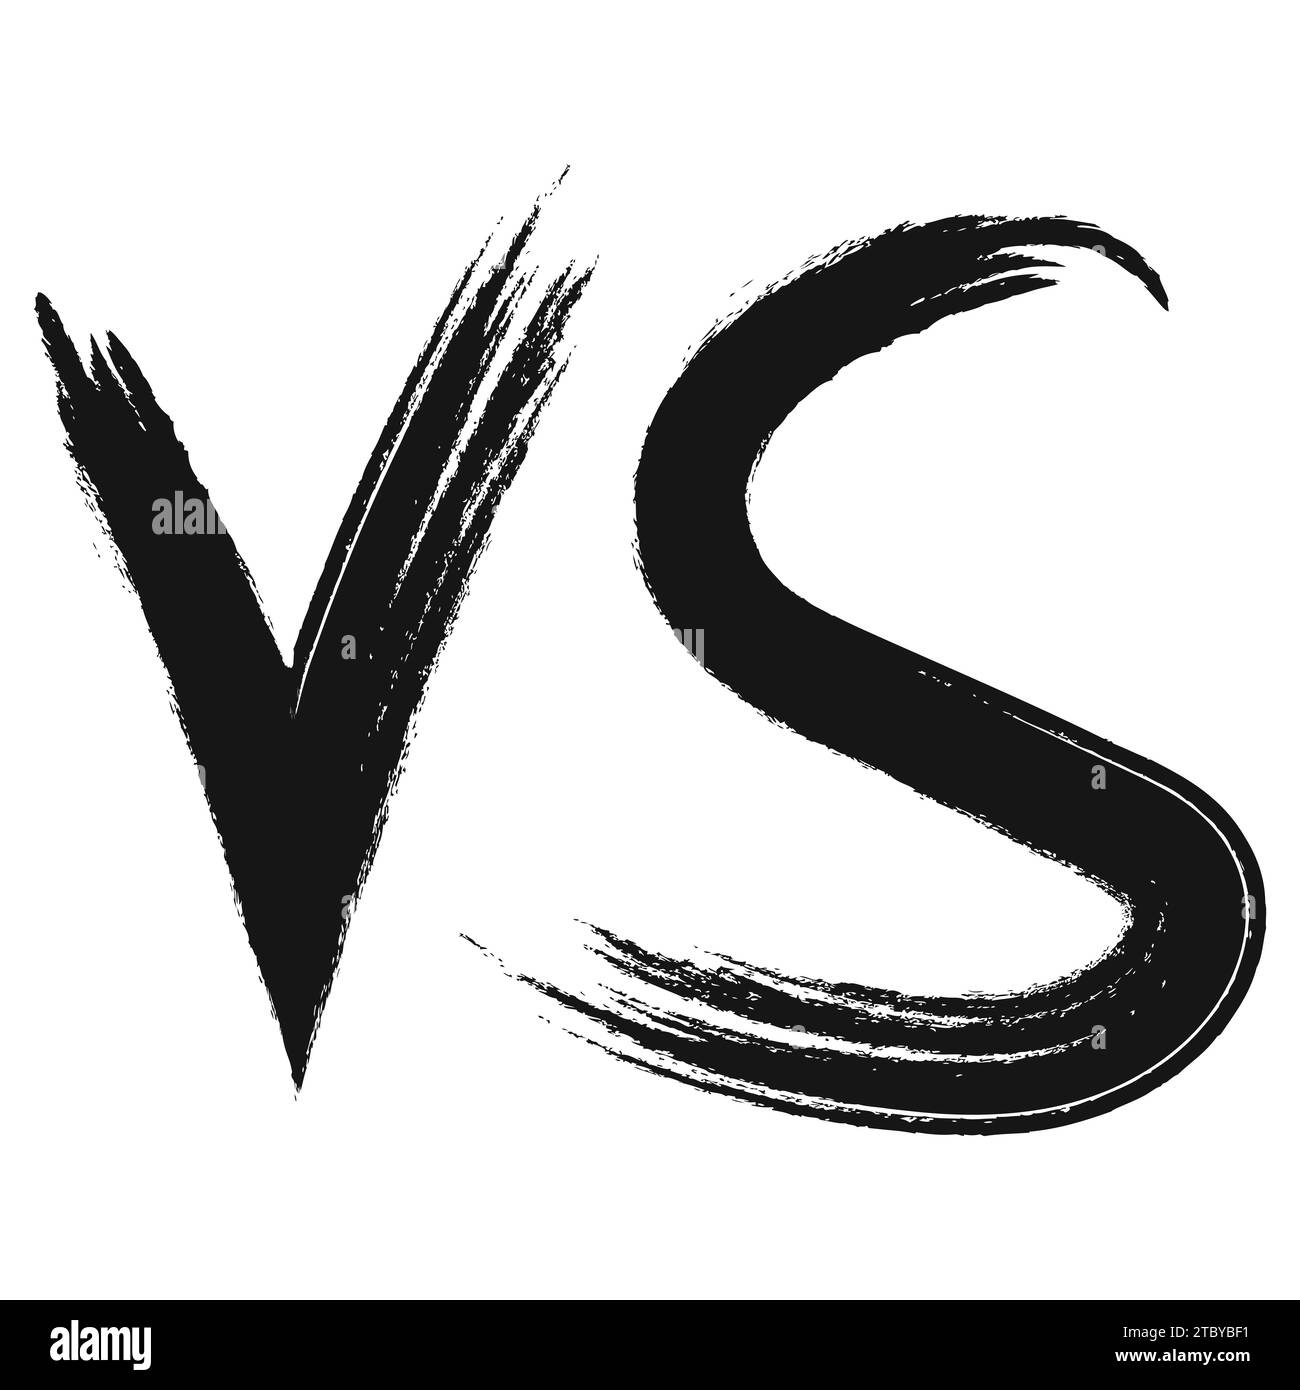 Icon competition battle versus, letters vs symbol fight v s Stock Vector